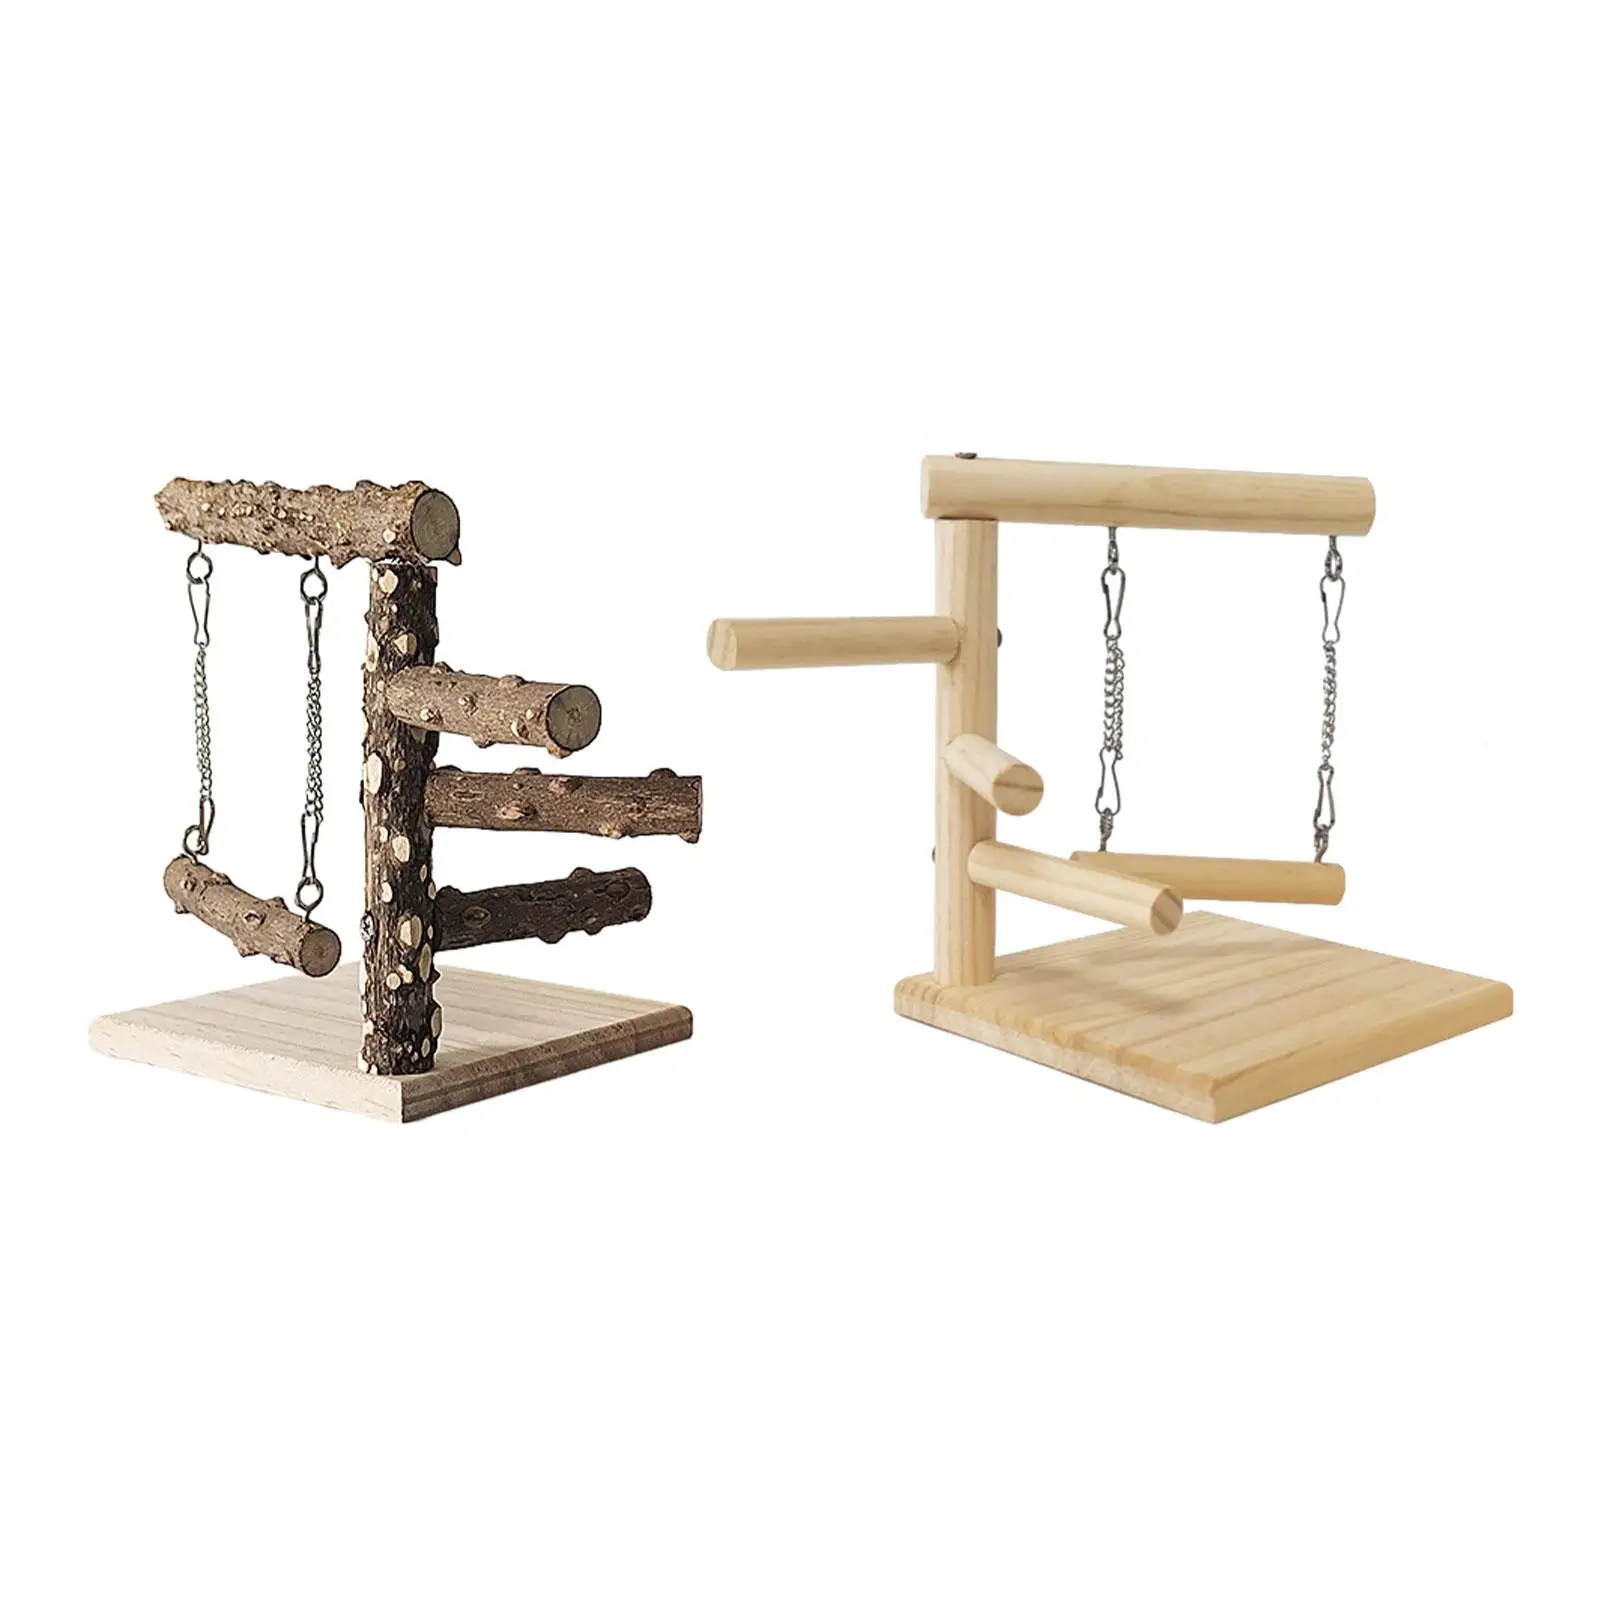 Bird Perch Stand Tabletop Exercise Gym Playground Parrot Playground Bird Gym for Lovebirds Canaries Cockatiels Parakeets Parrots